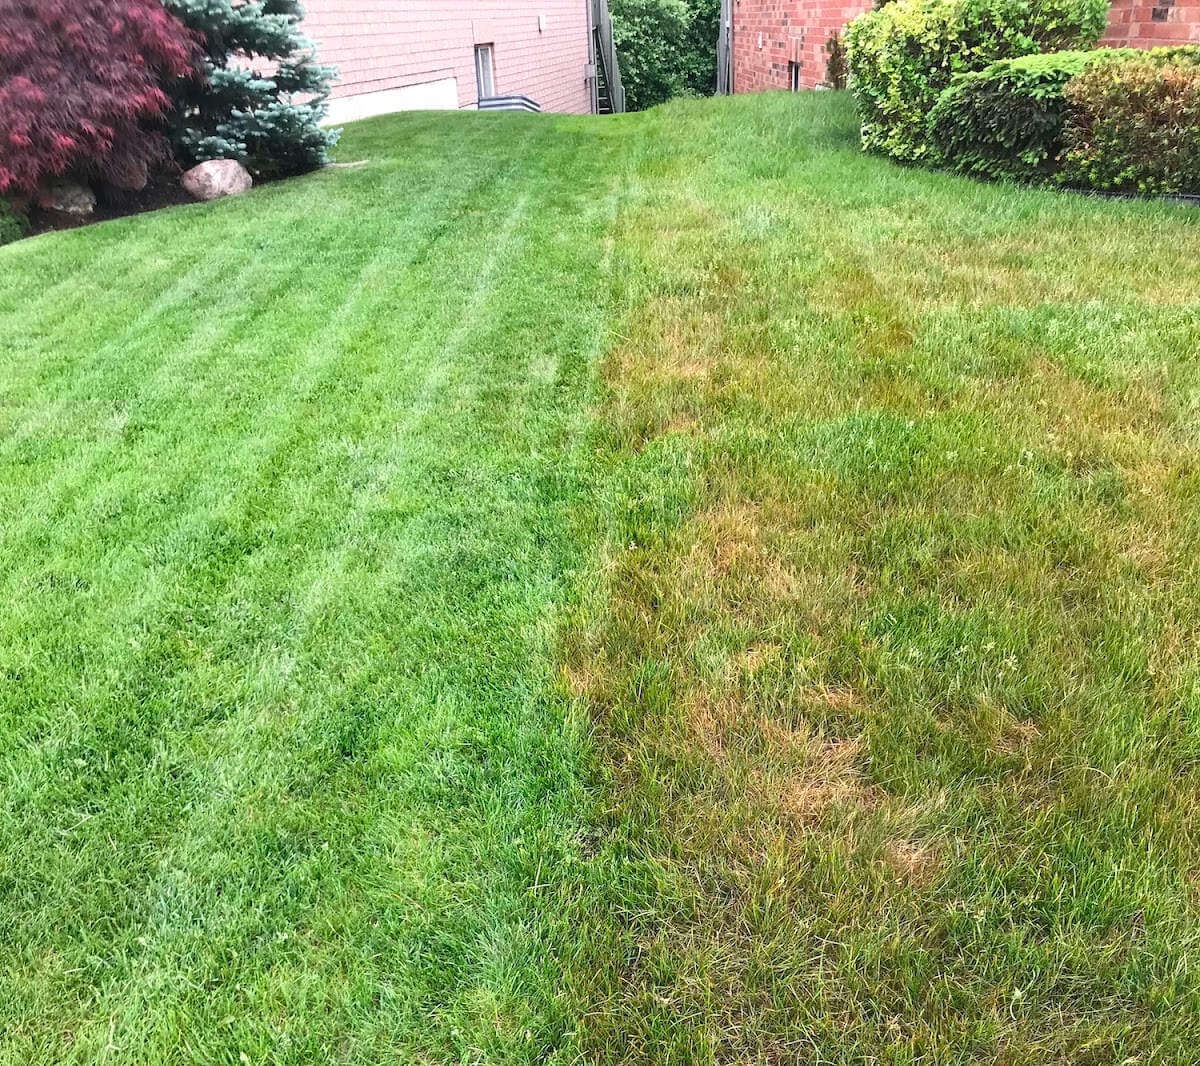 A photo of a diseased lawn